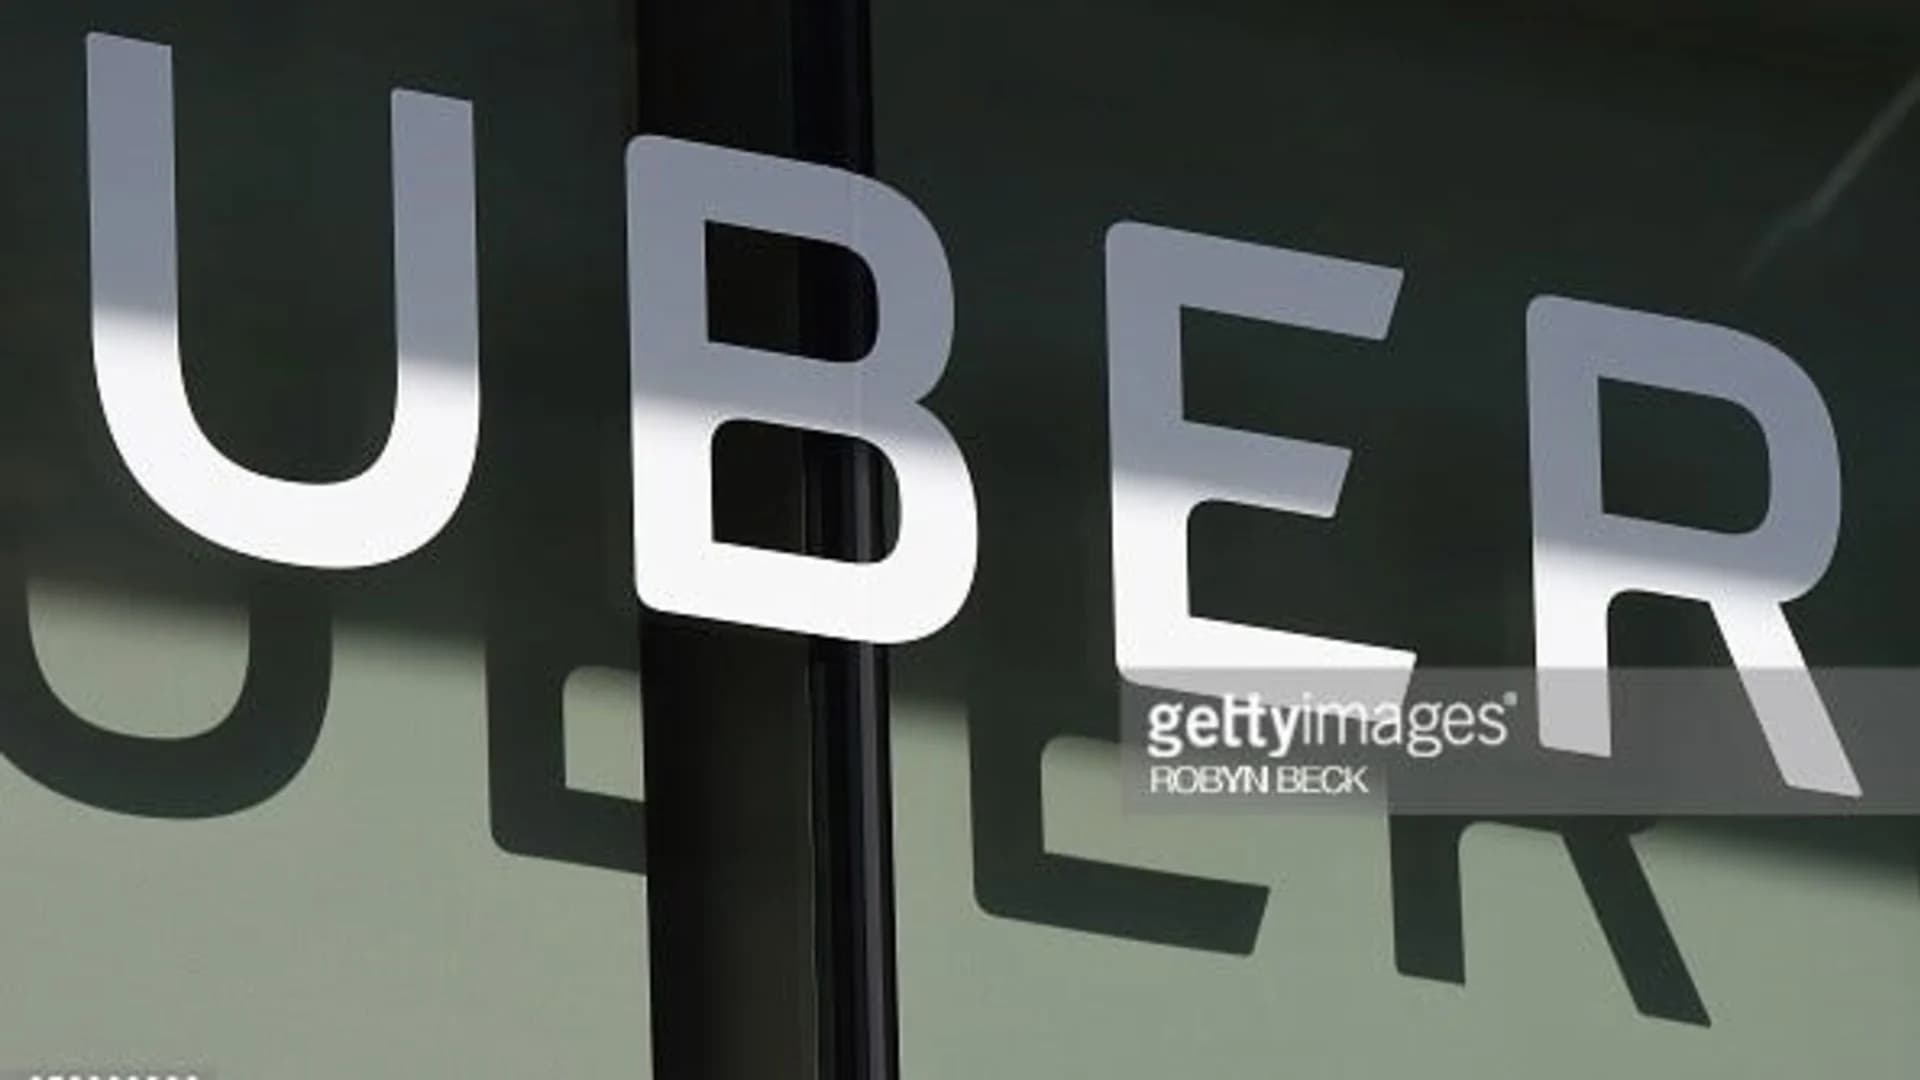 #N12BX: Uber ends policy of forced arbitration for sexual assault claims